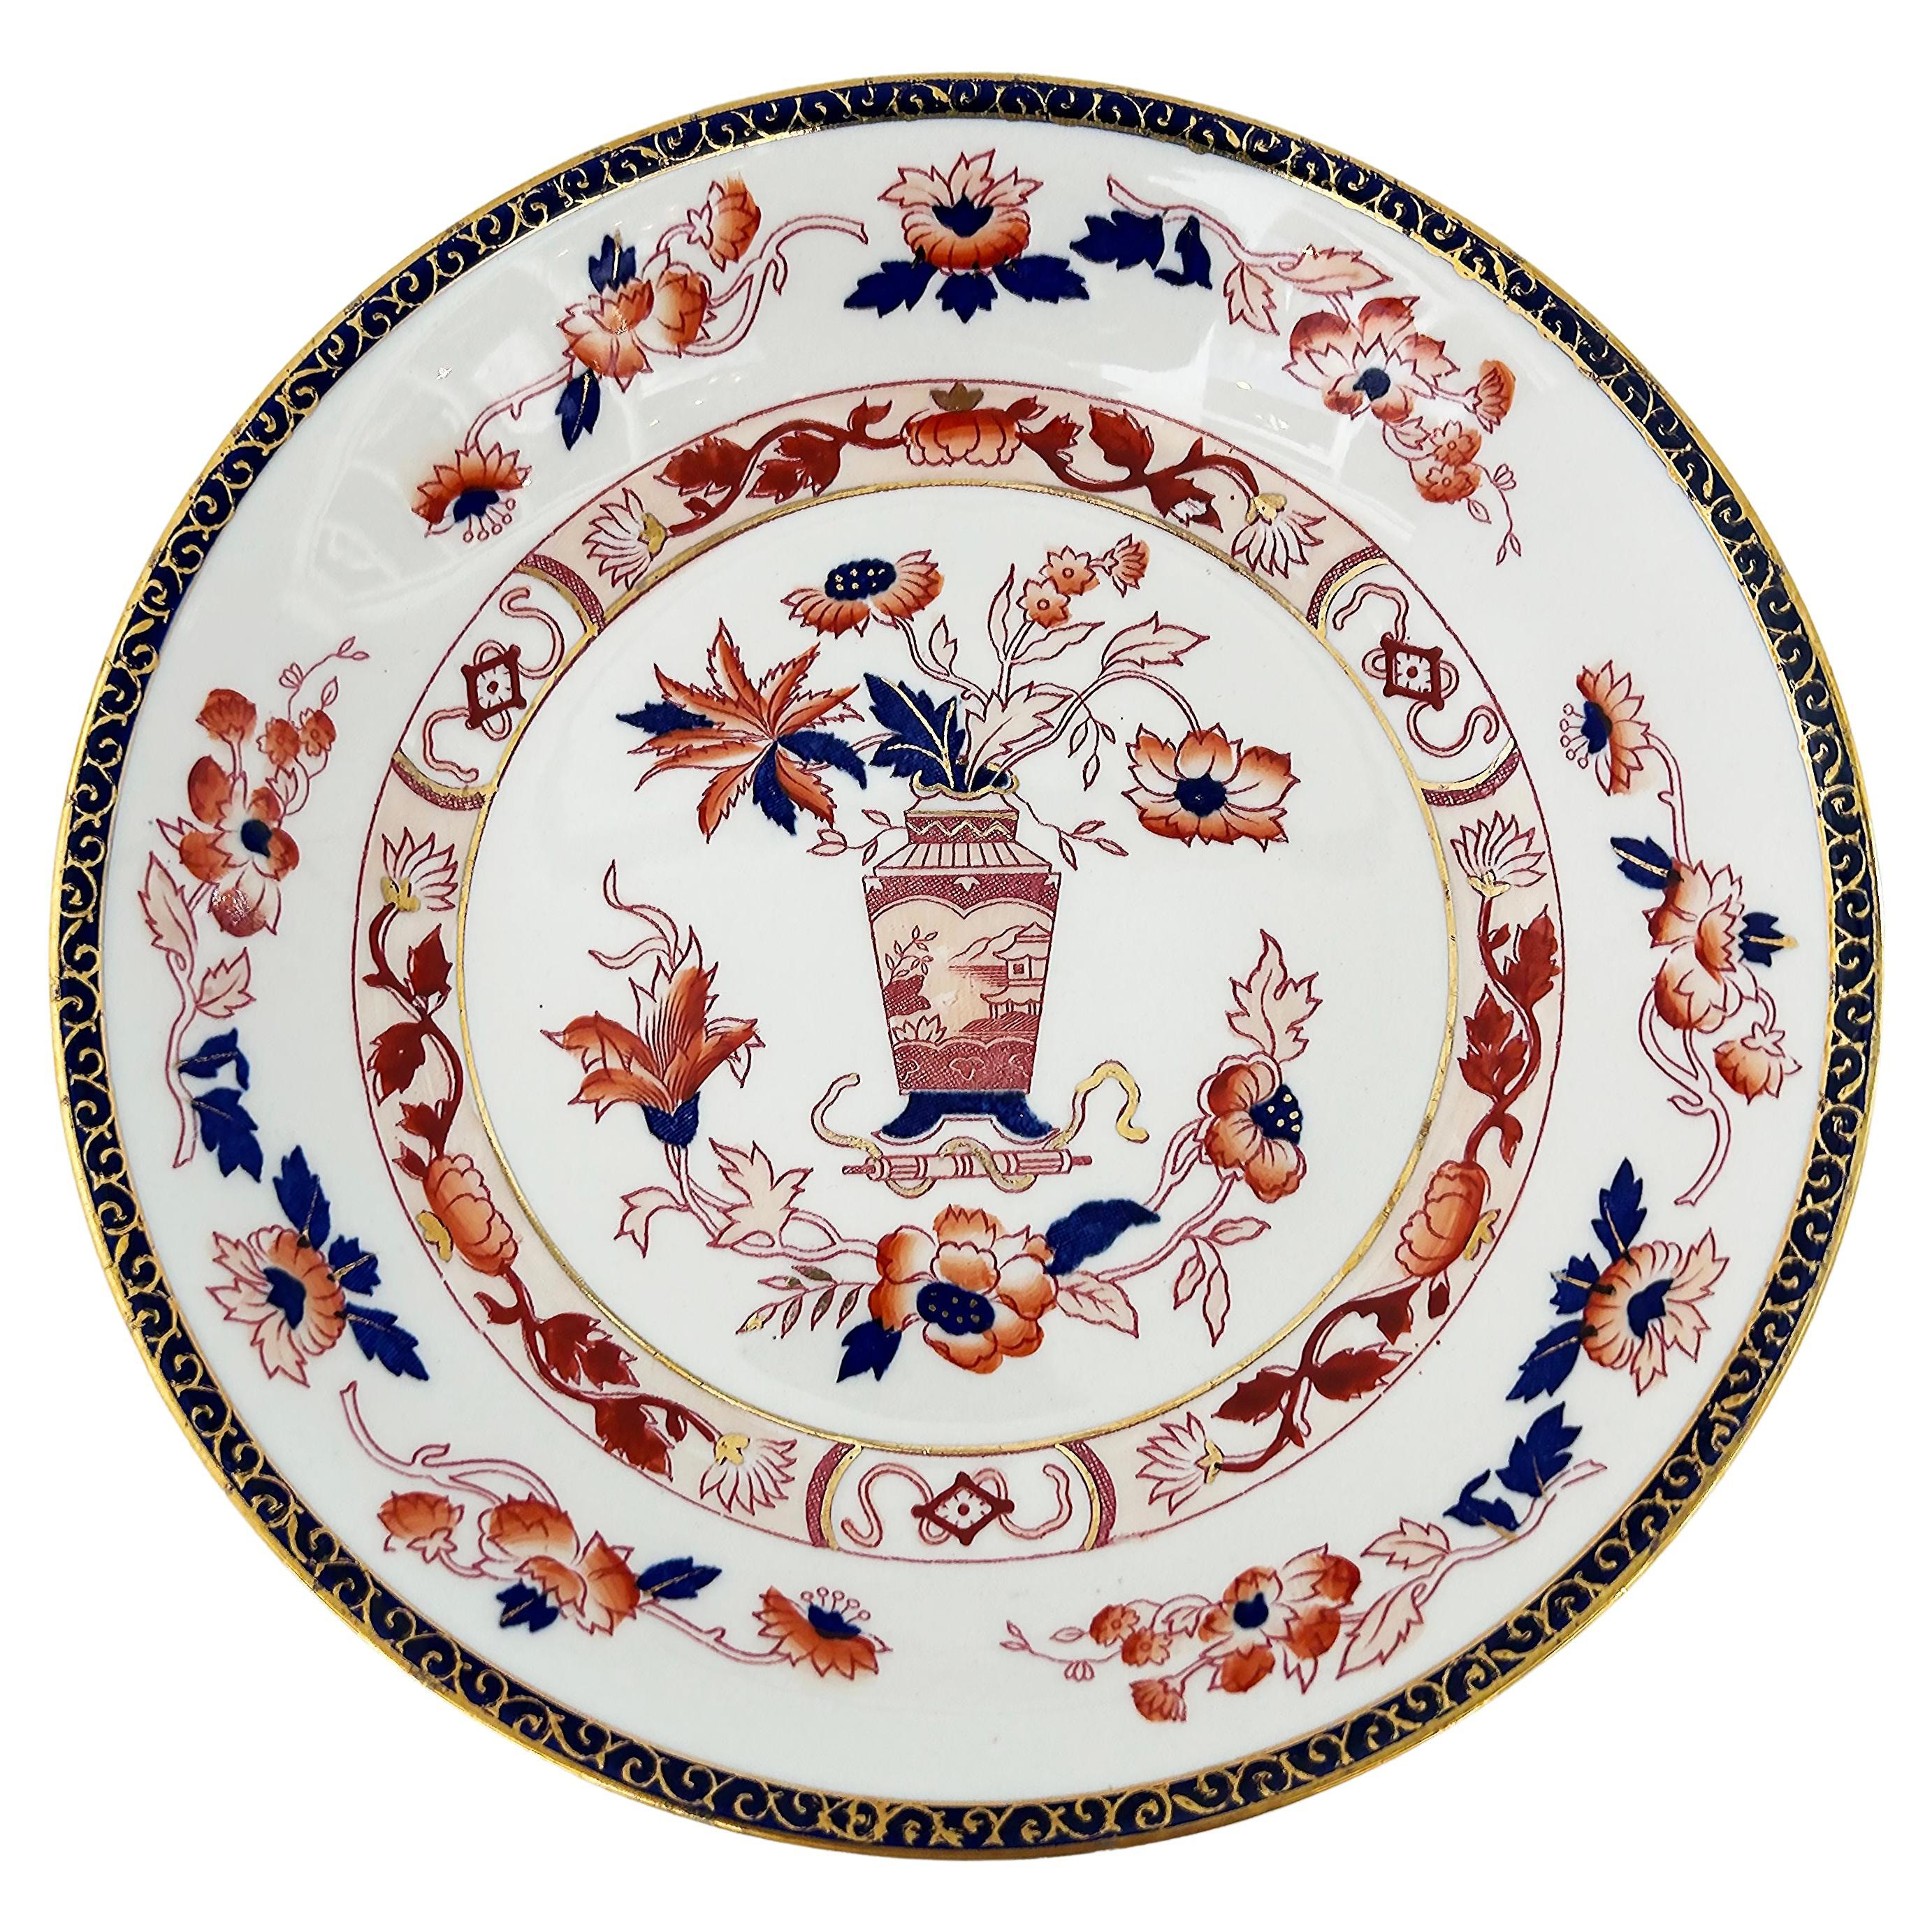 Chinoiserie Red, Blue and Gilt Decorated Porcelain Plate, Illegibly Marked